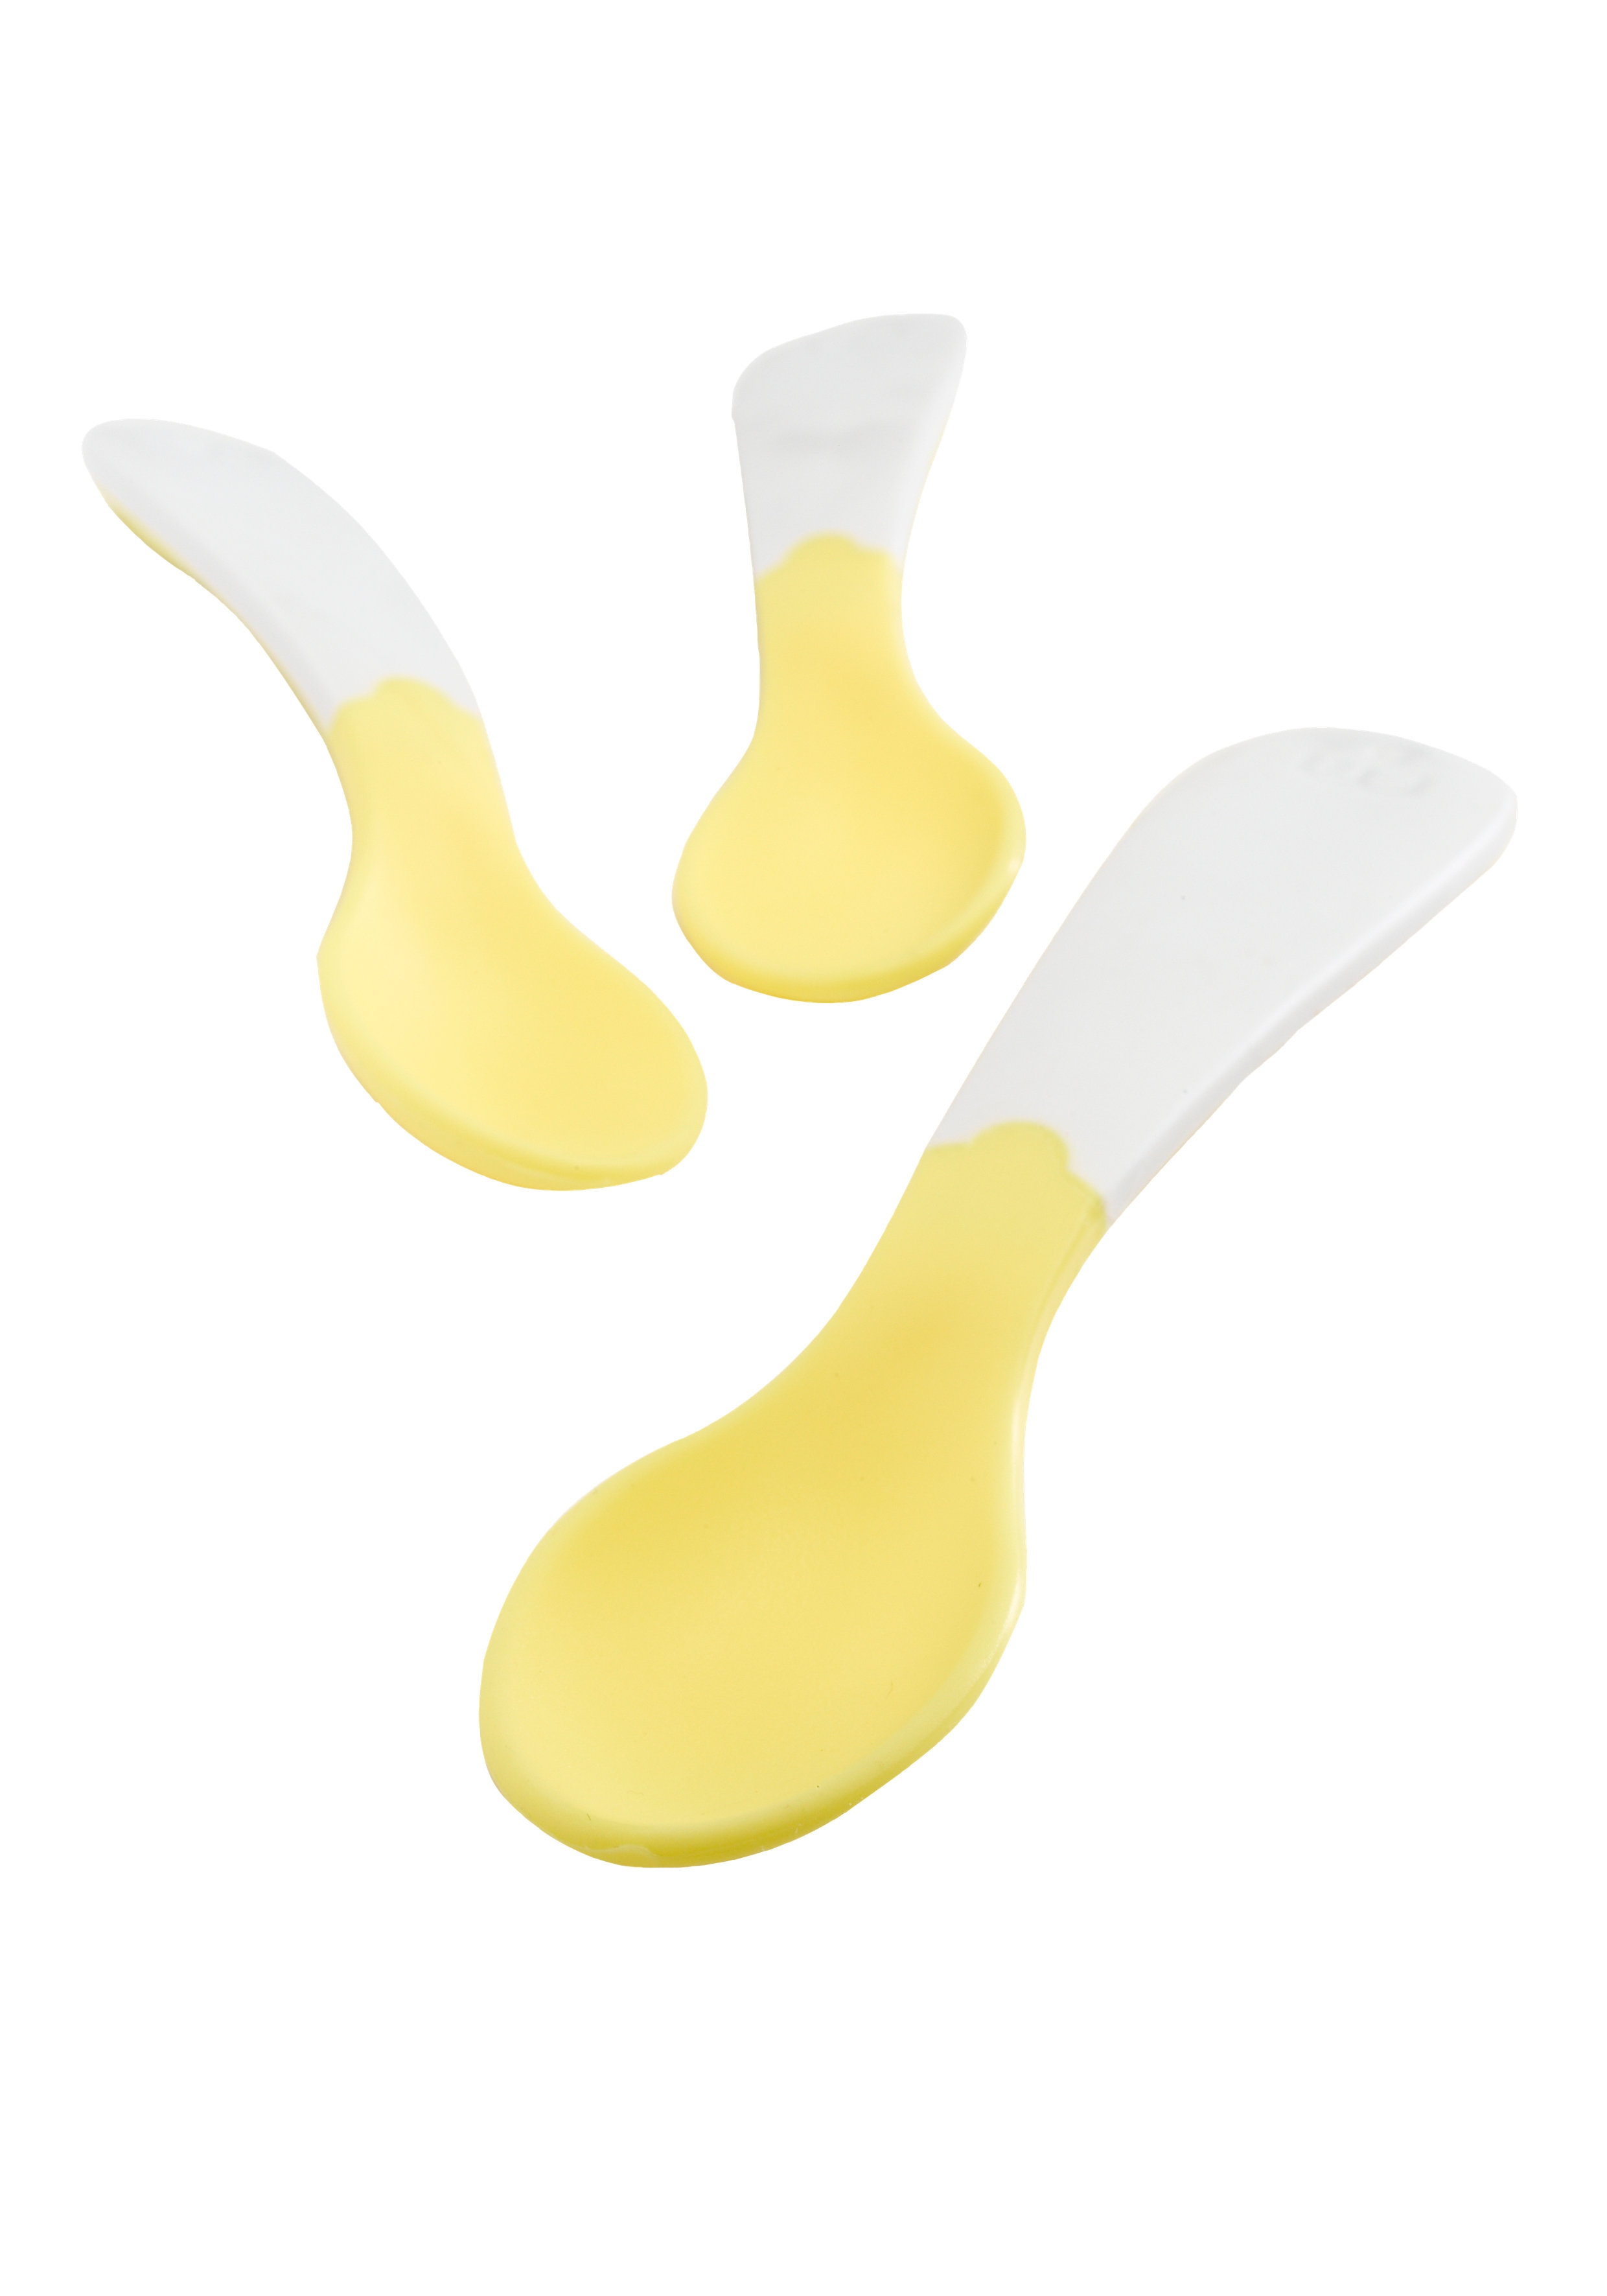 Mothercare | Mothercare Short Spoons Pack of 3 White / Yellow 1